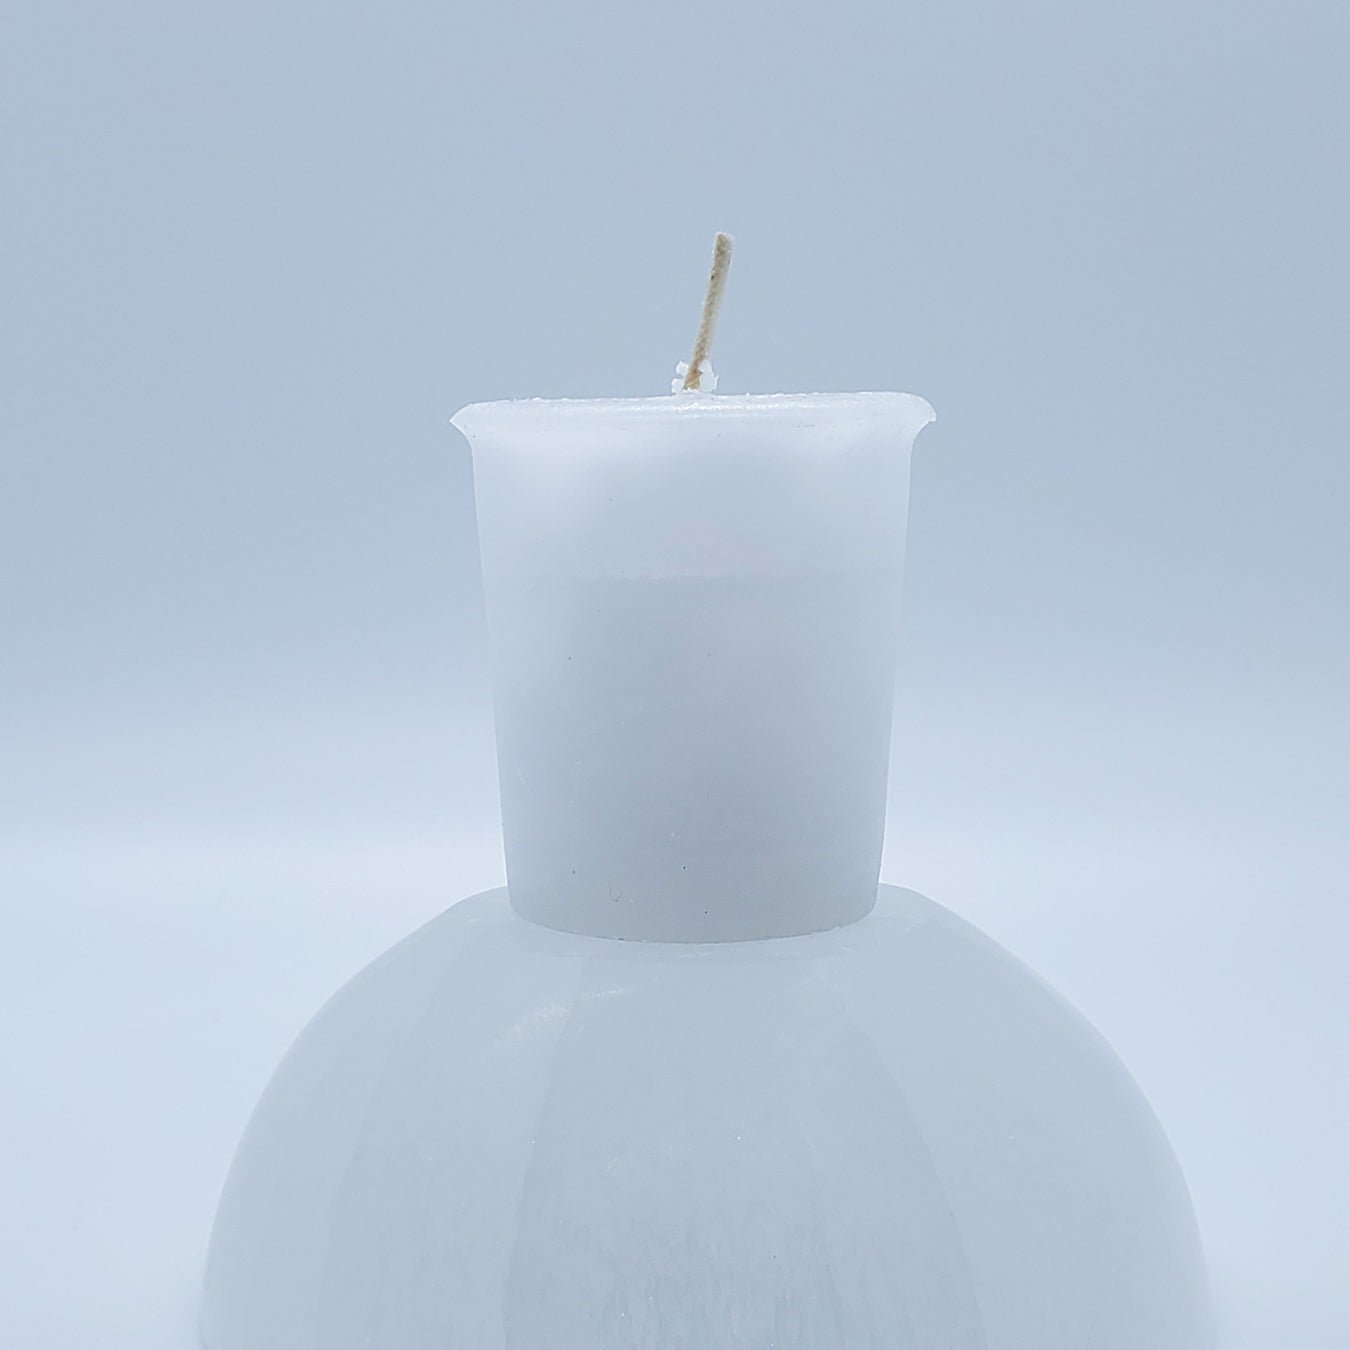 Cleansing | Bright White | Votive Intention Candle | Reiki Charged - Spiral Circle